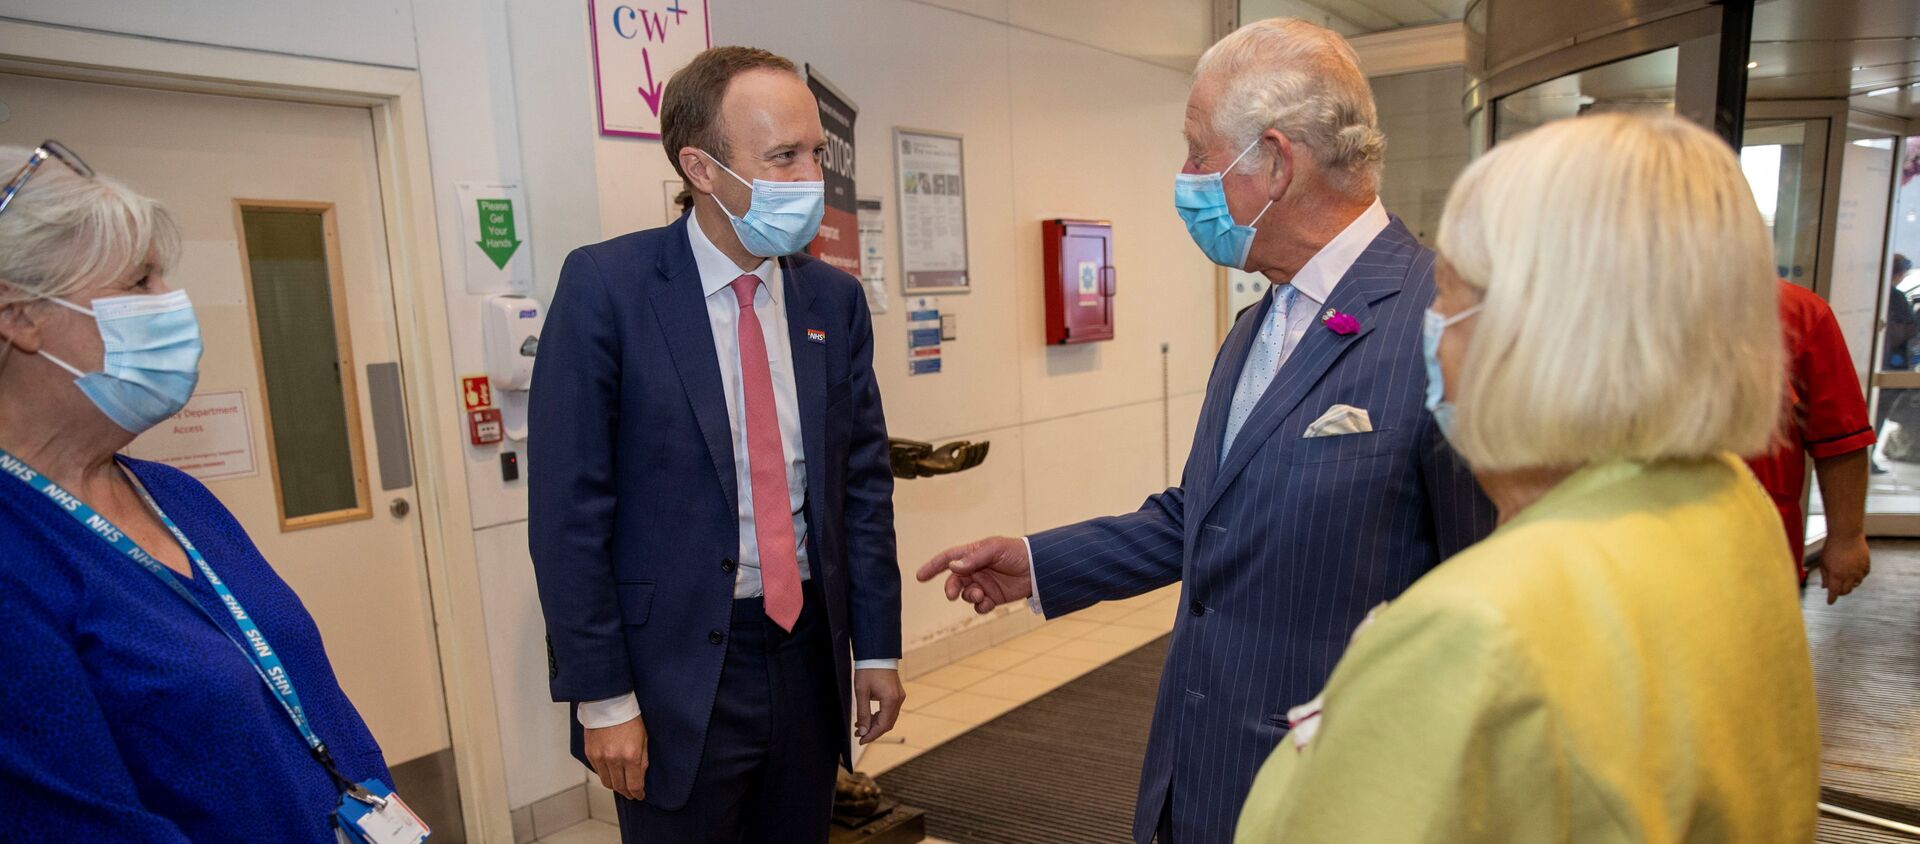 Britain's Prince Charles and Health Secretary Matt Hancock meet with NHS staff during a visit to Chelsea and Westminster hospital in London, Britain, 17 June 2021 - Sputnik International, 1920, 18.06.2021